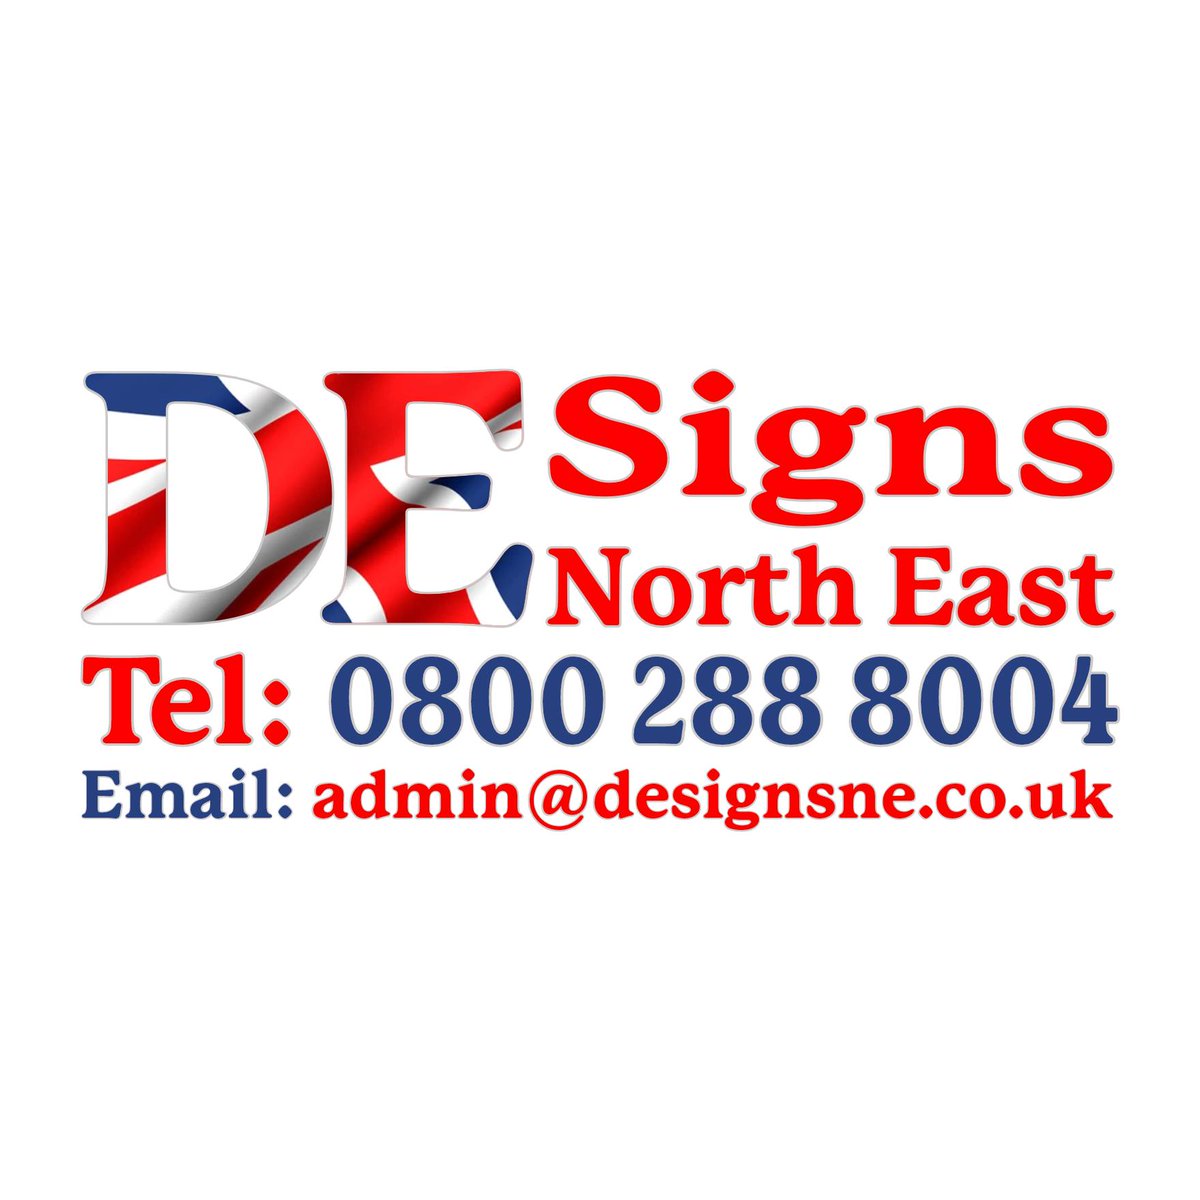 D E Signs NE Ltd are the latest local business to advertise with us, want to advertise your business? Email us via our website novaradio.co.uk